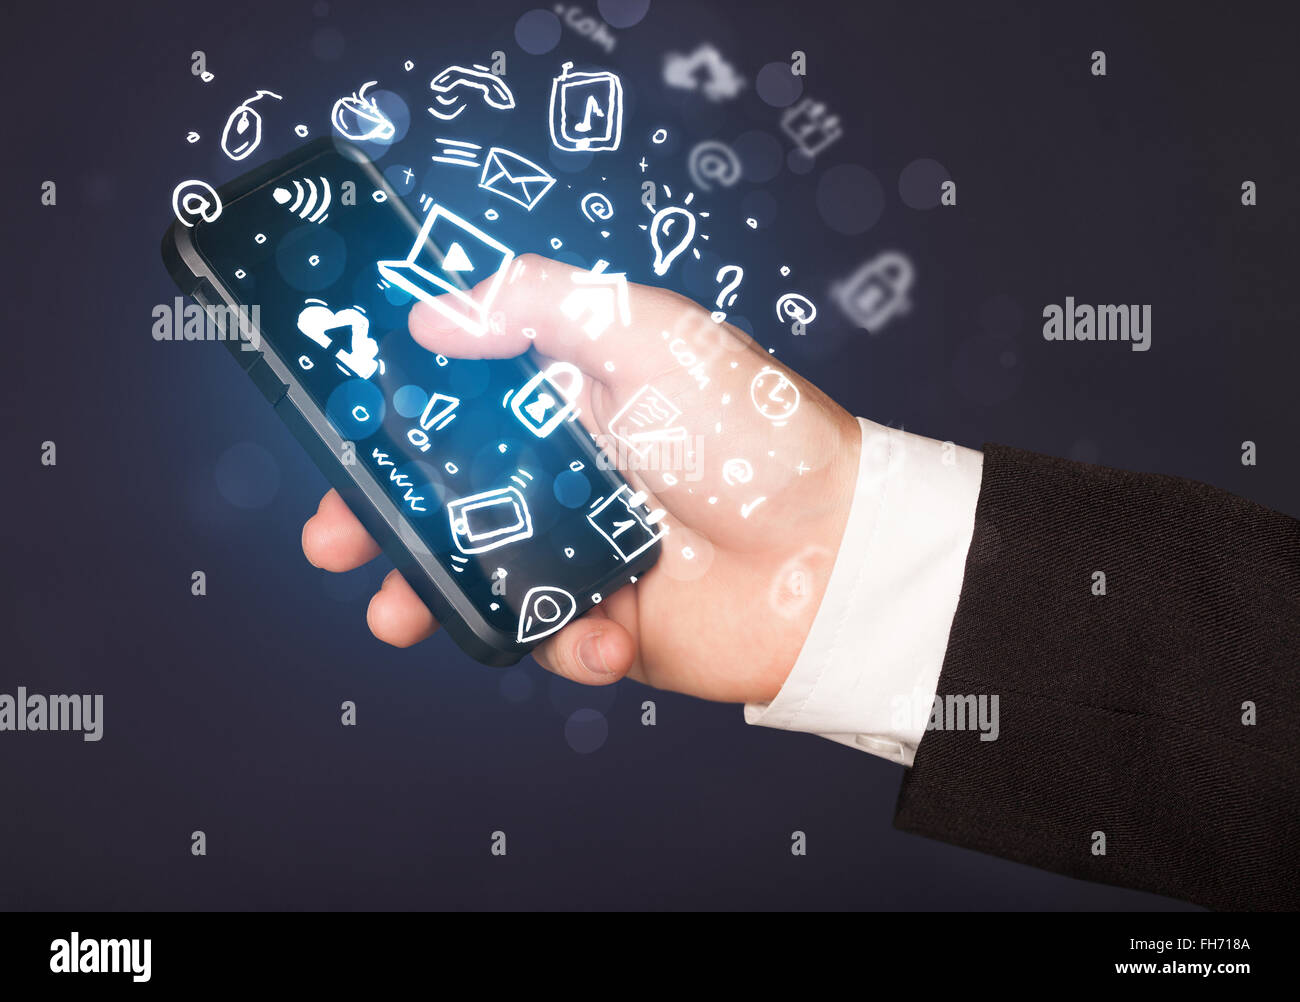 Hand holding smartphone with media icons and symbol Stock Photo